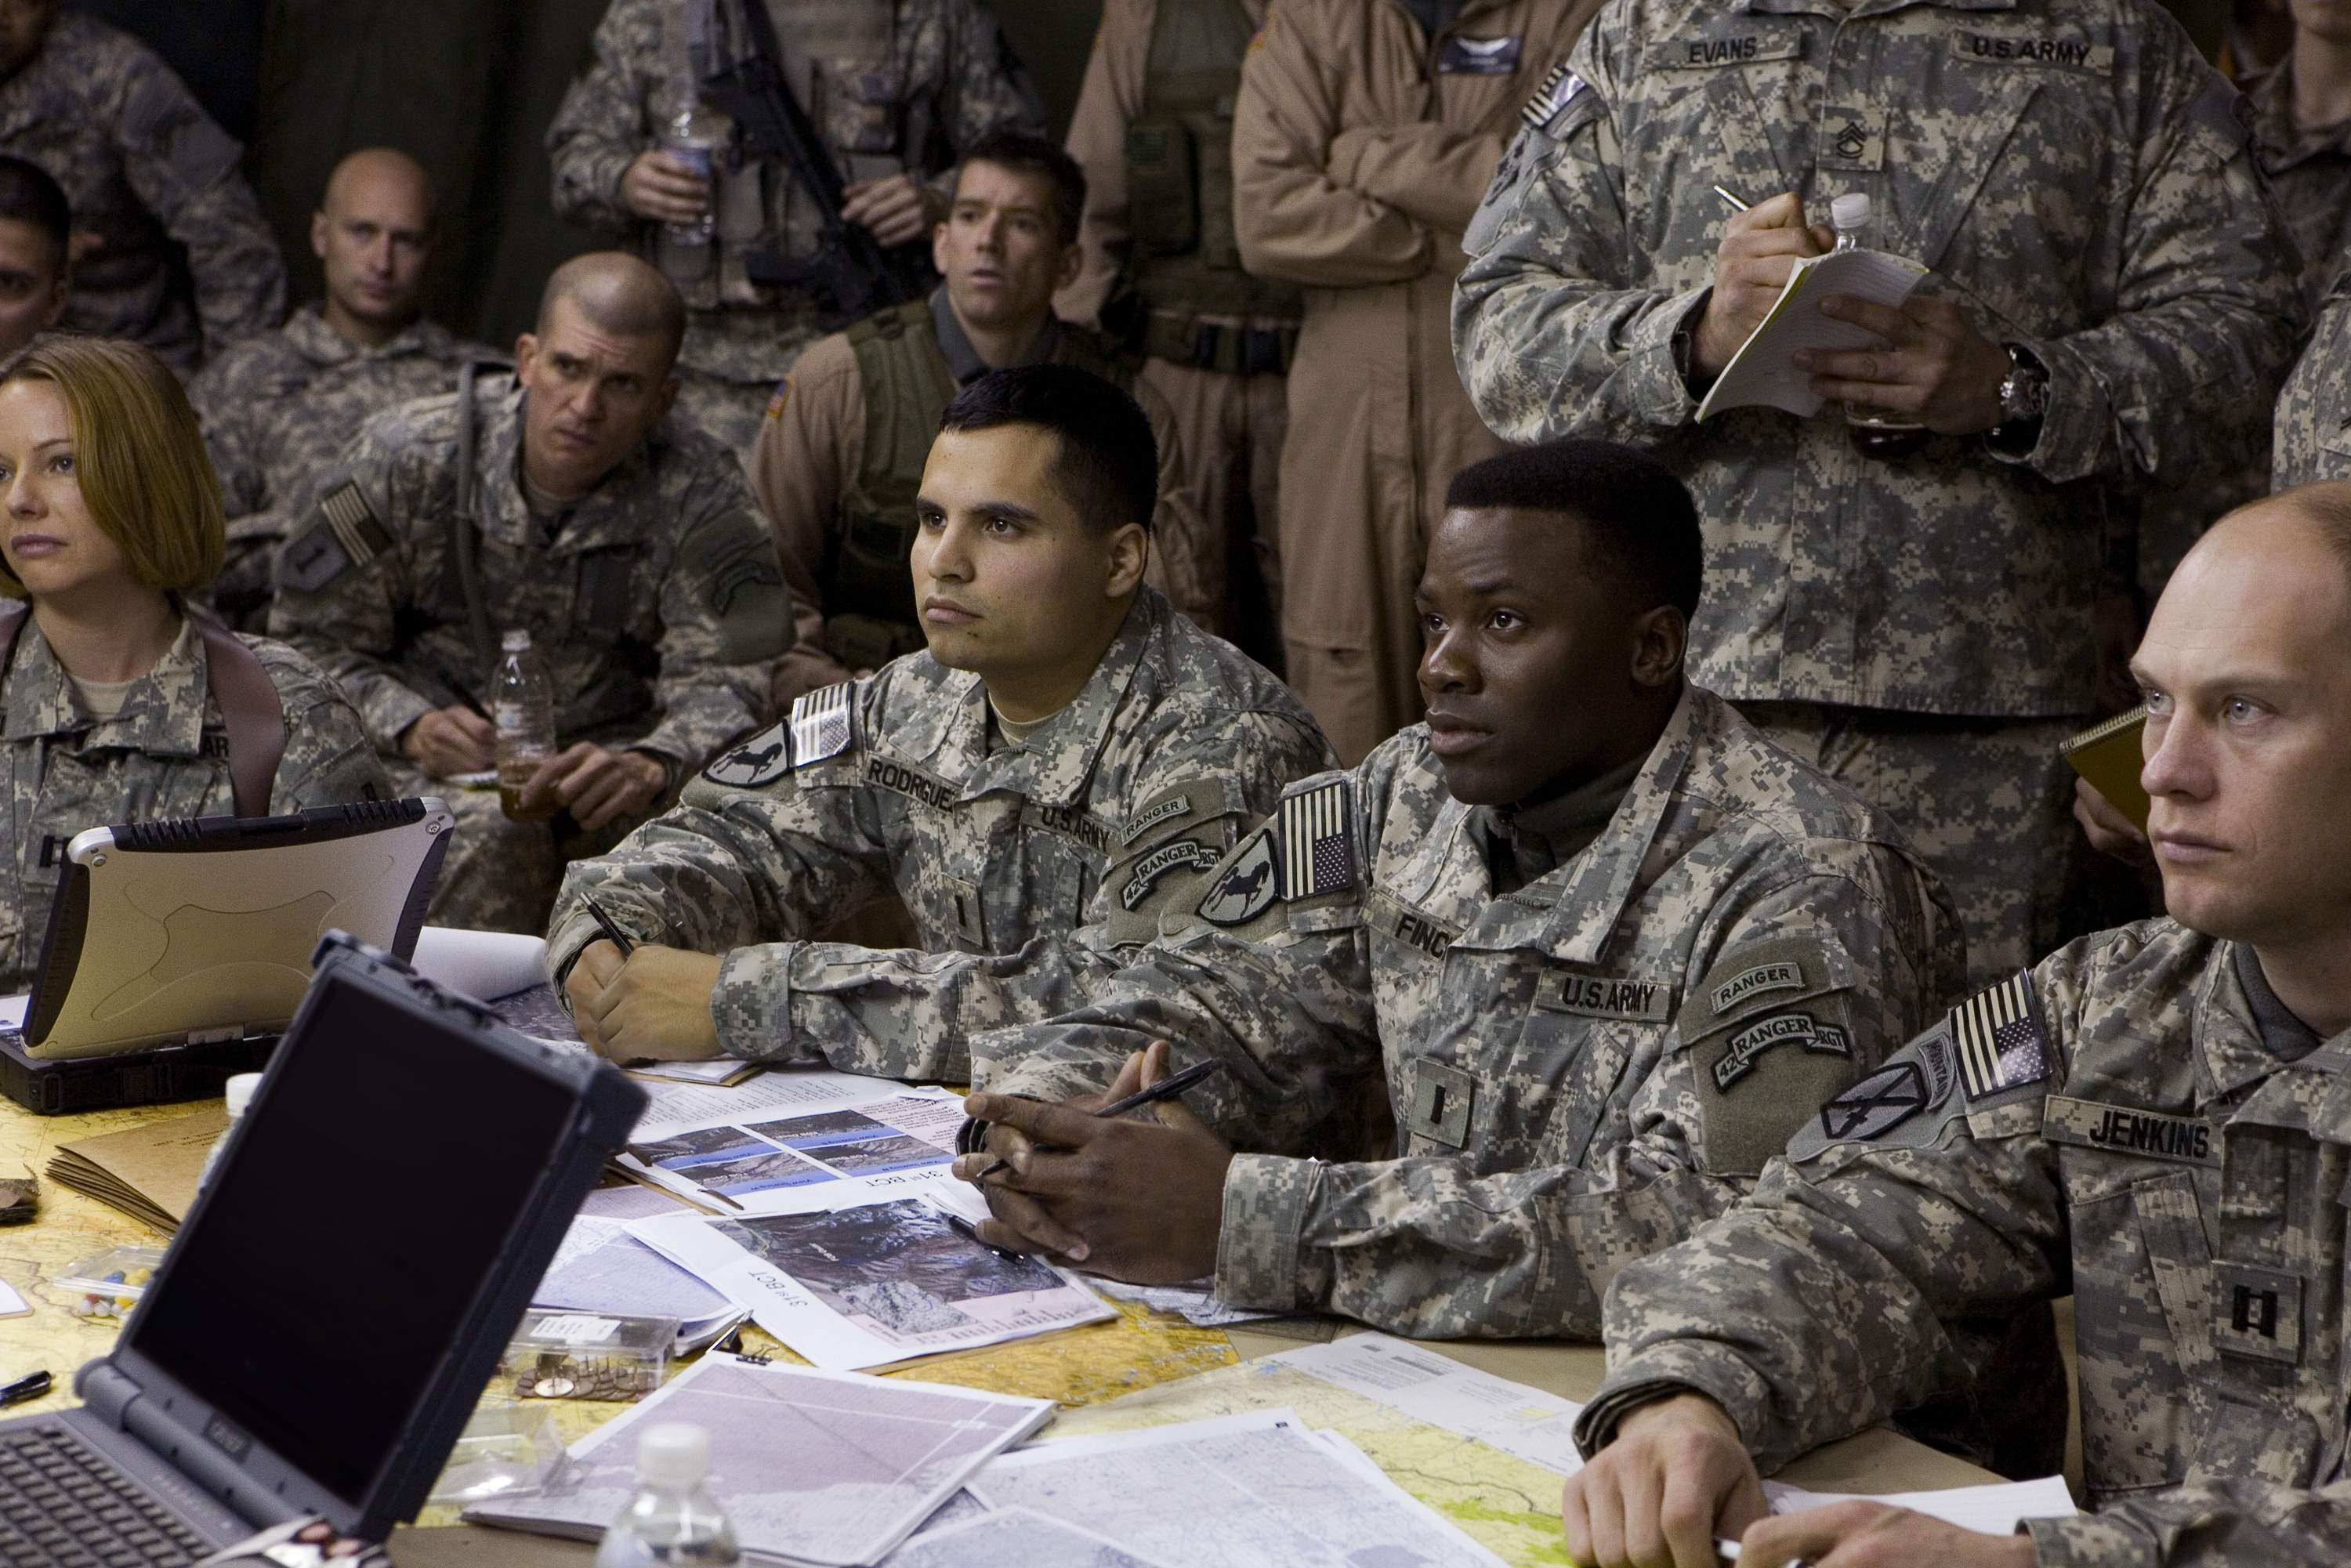 MICHAEL PENA (left center) and DEREK LUKE (right center) star in United Artists/MGM Pictures' LIONS FOR LAMBS (2007). Photo by: David James.